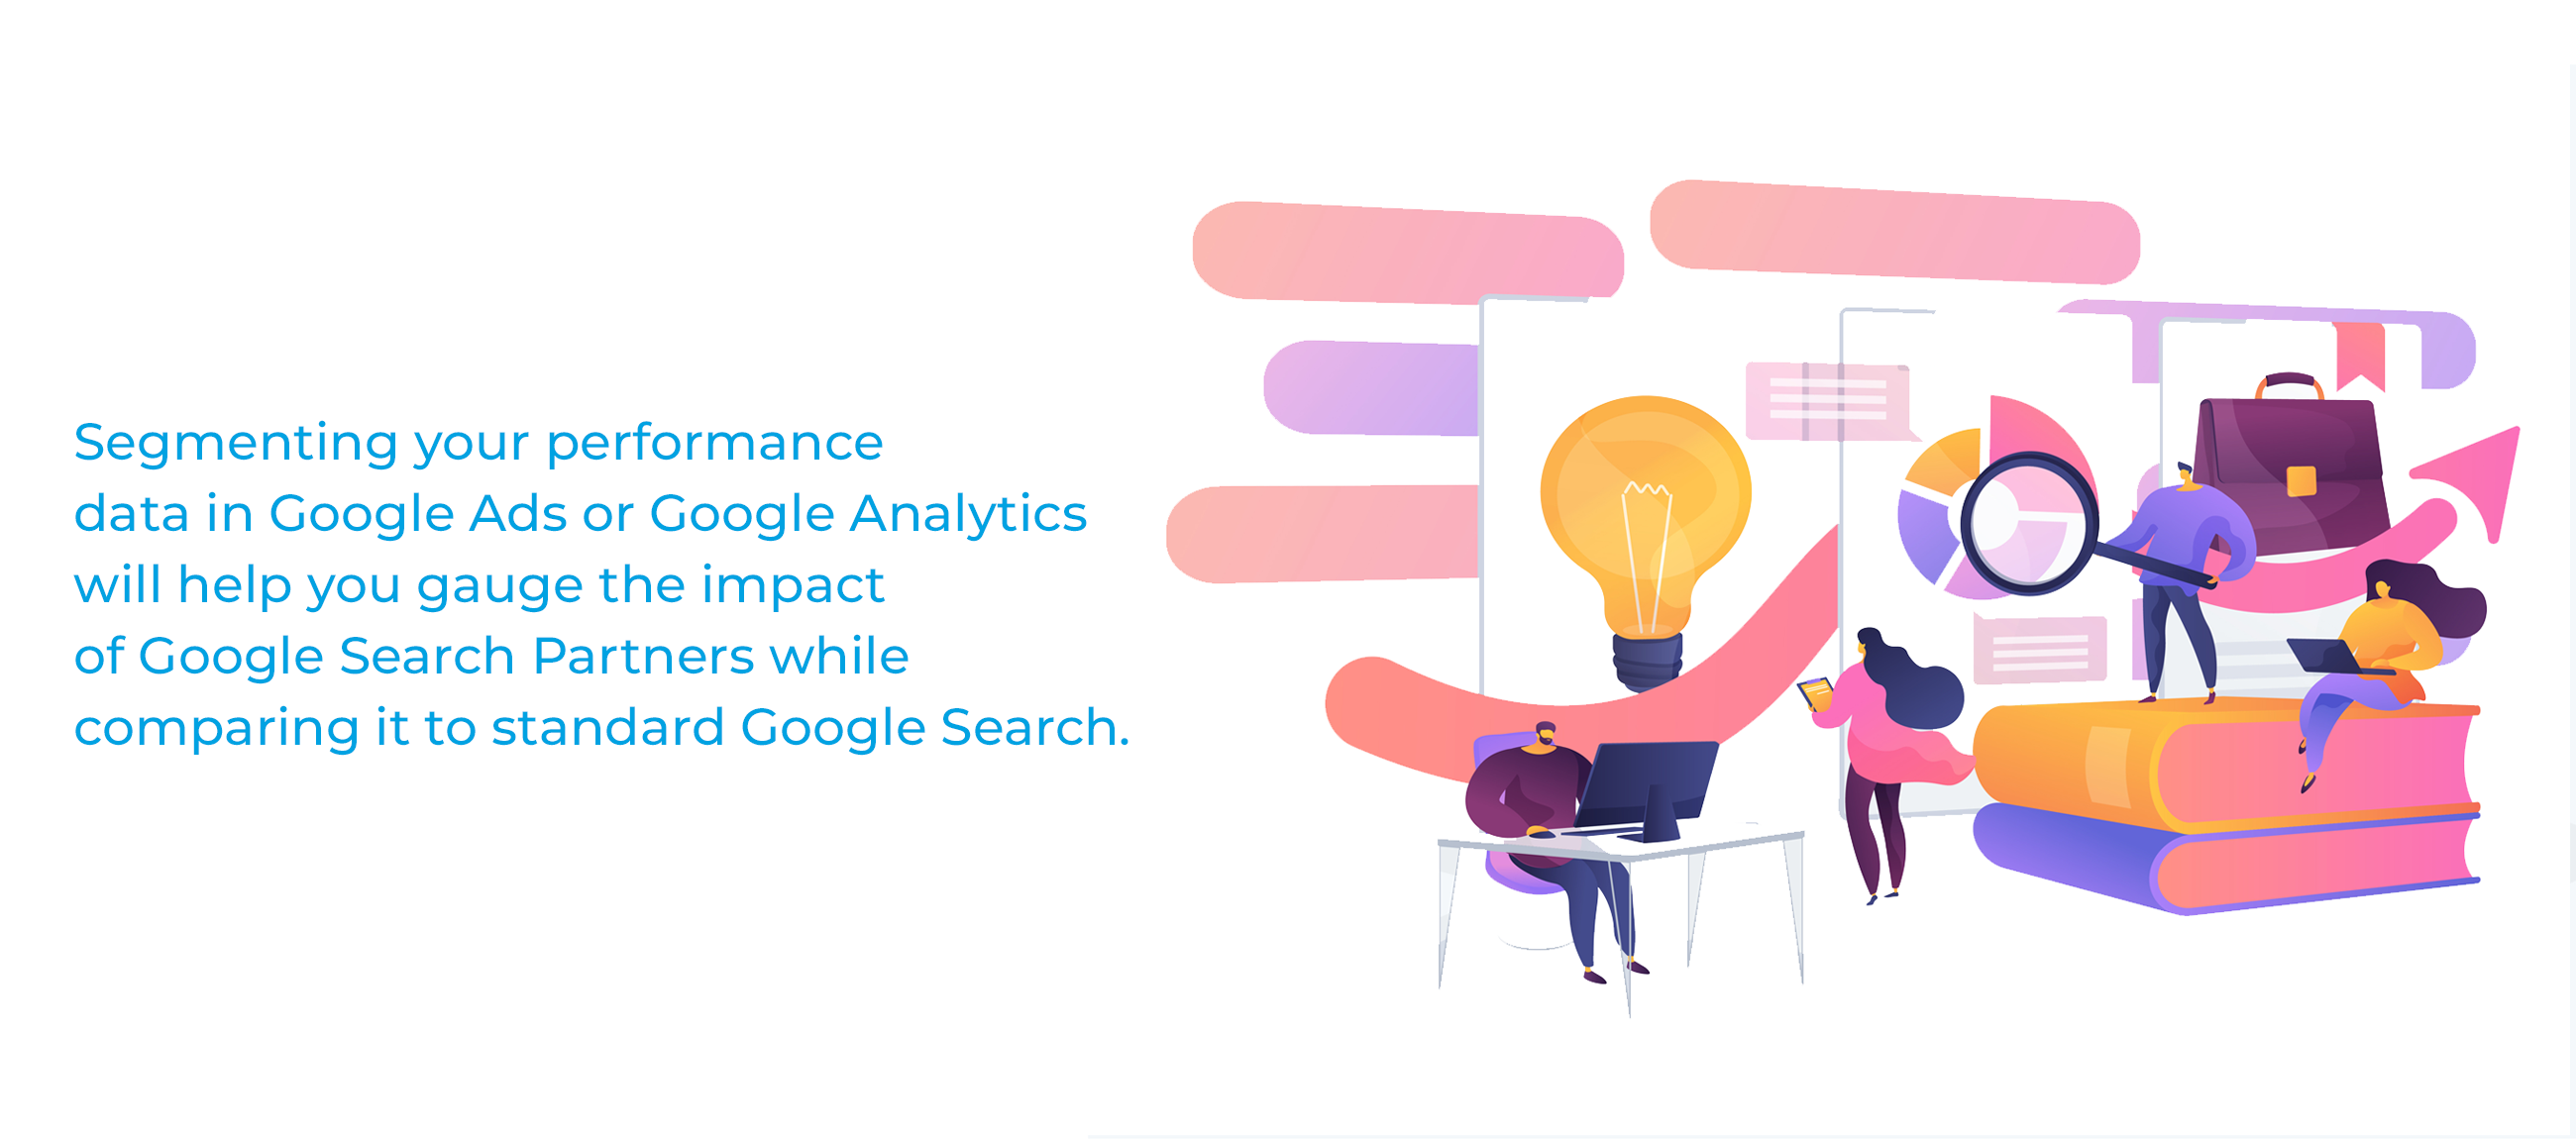 Segmenting your performance data in Google Ads or Google Analytics will help you gauge the impact of Google Search Partners while comparing it to standard Google Search.